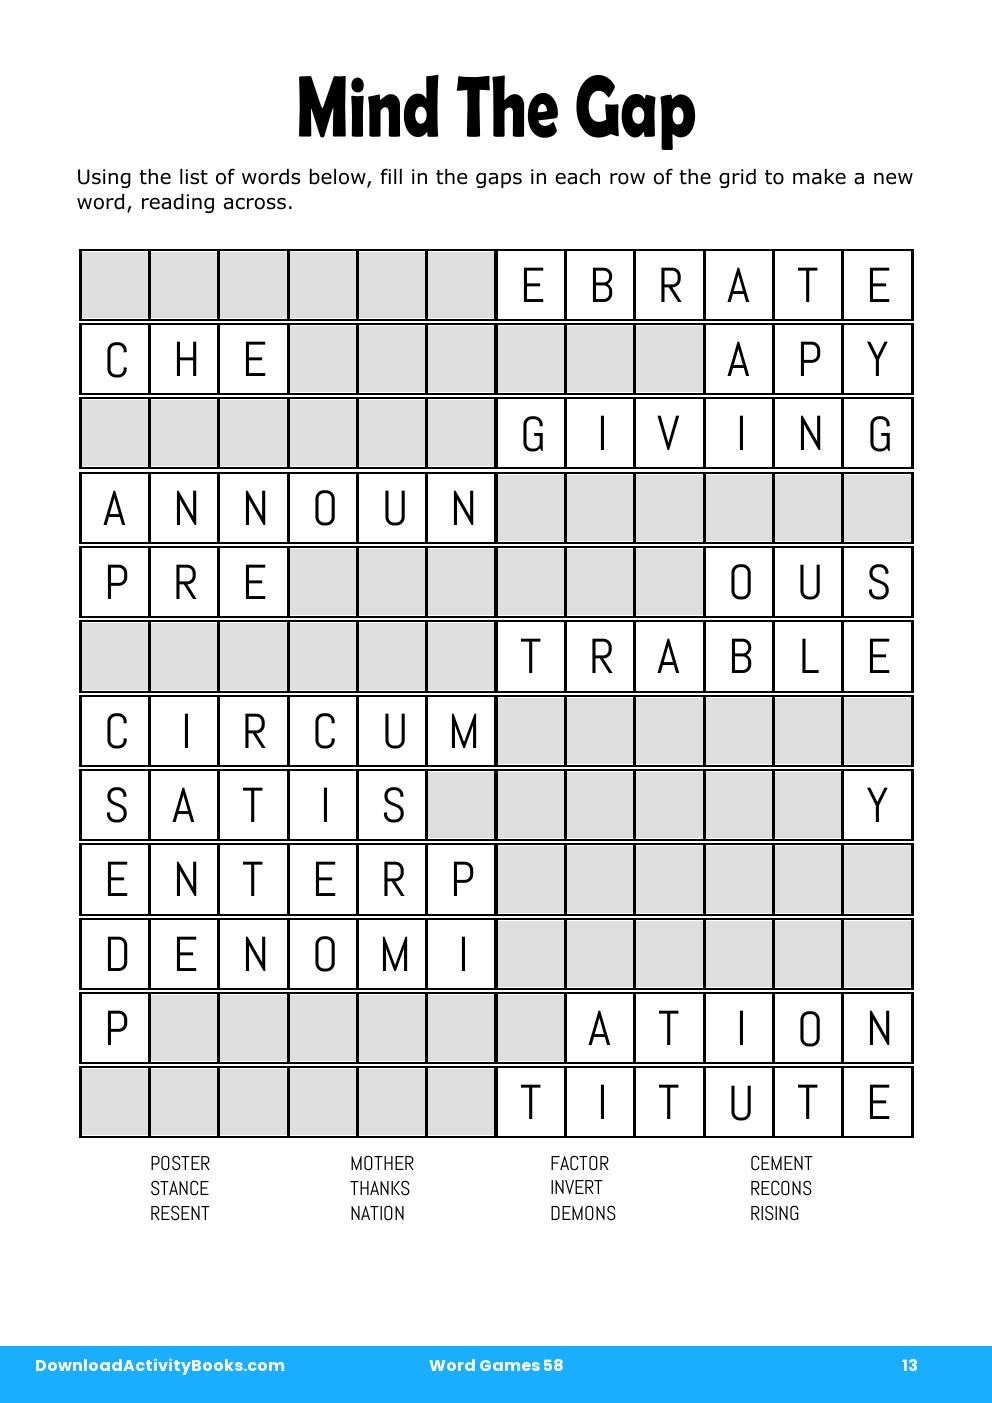 Mind The Gap in Word Games 58